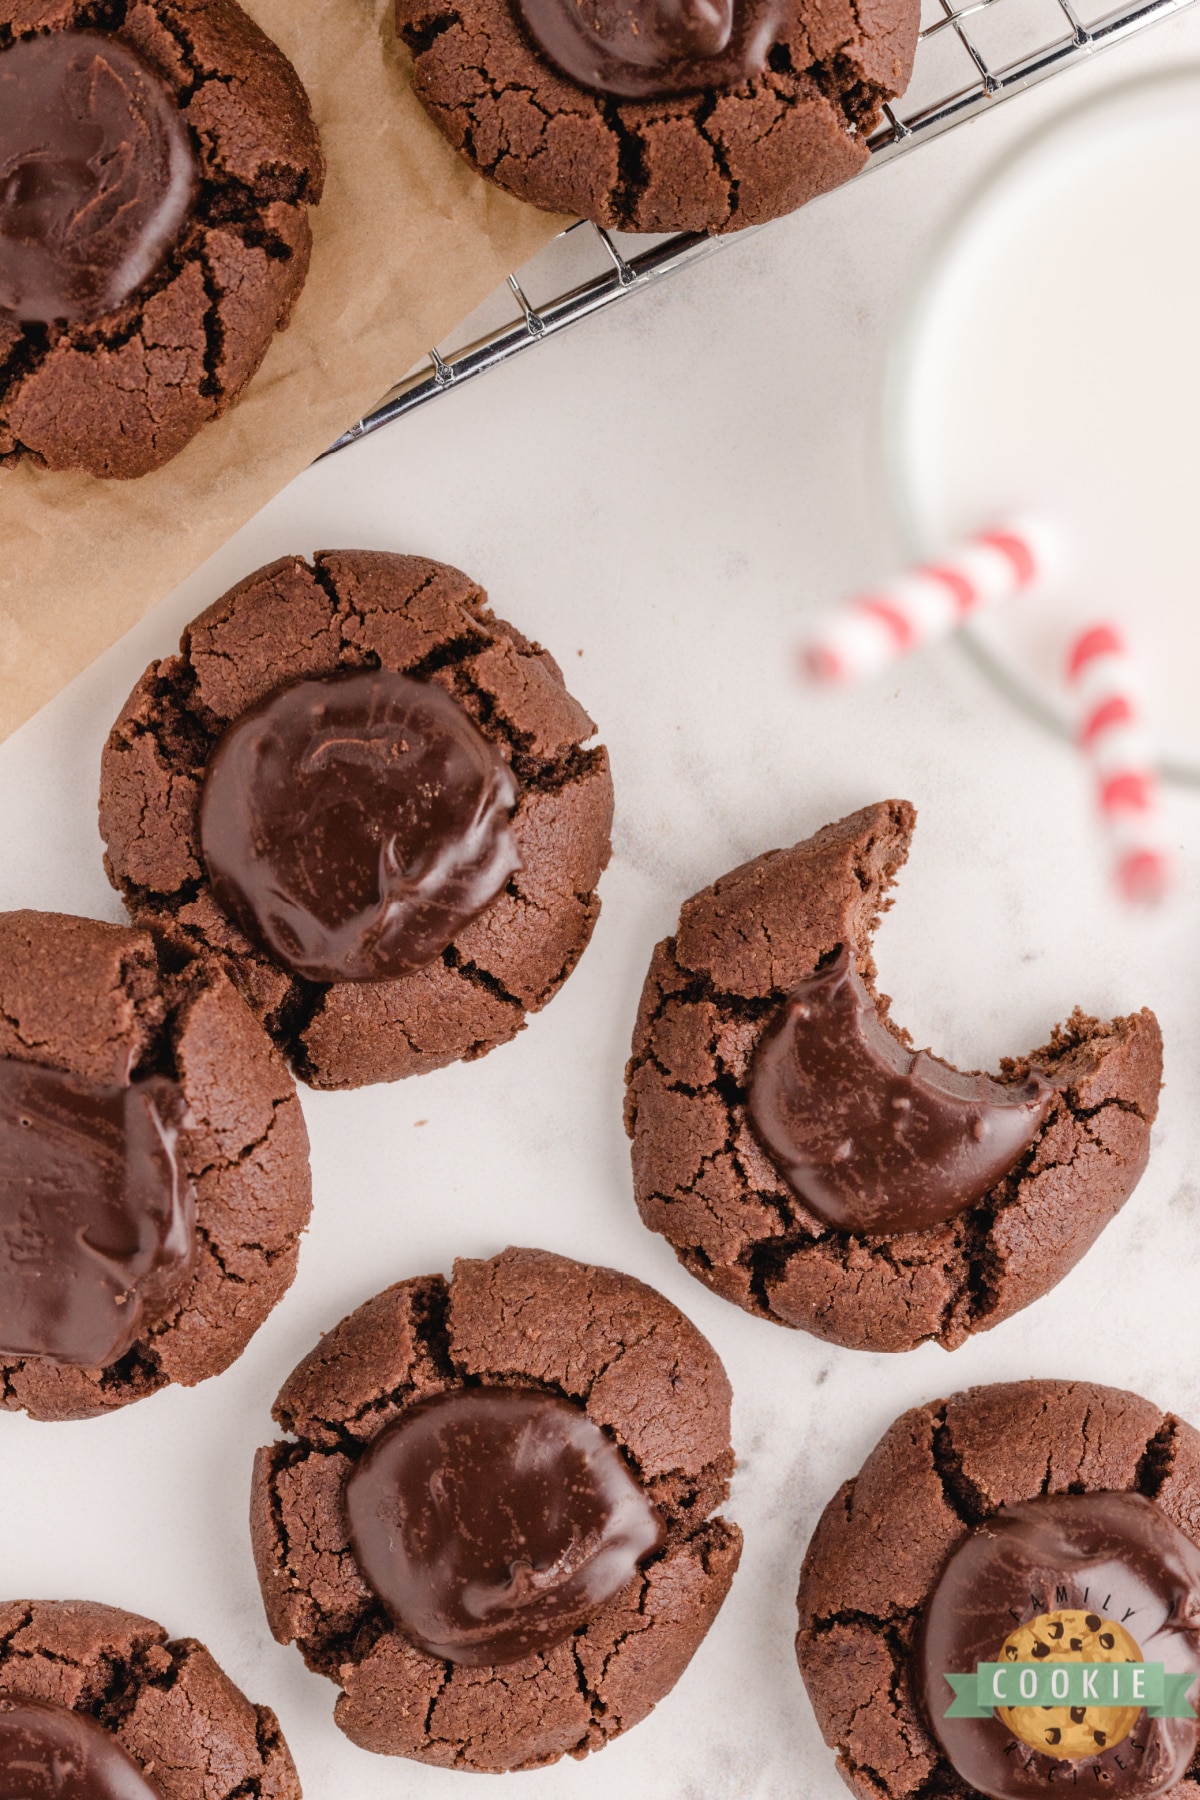 Double Chocolate Thumbprint Cookies are thick, chewy chocolate cookies filled with a creamy chocolate ganache. Perfect chocolate cookie recipe for all chocolate lovers!